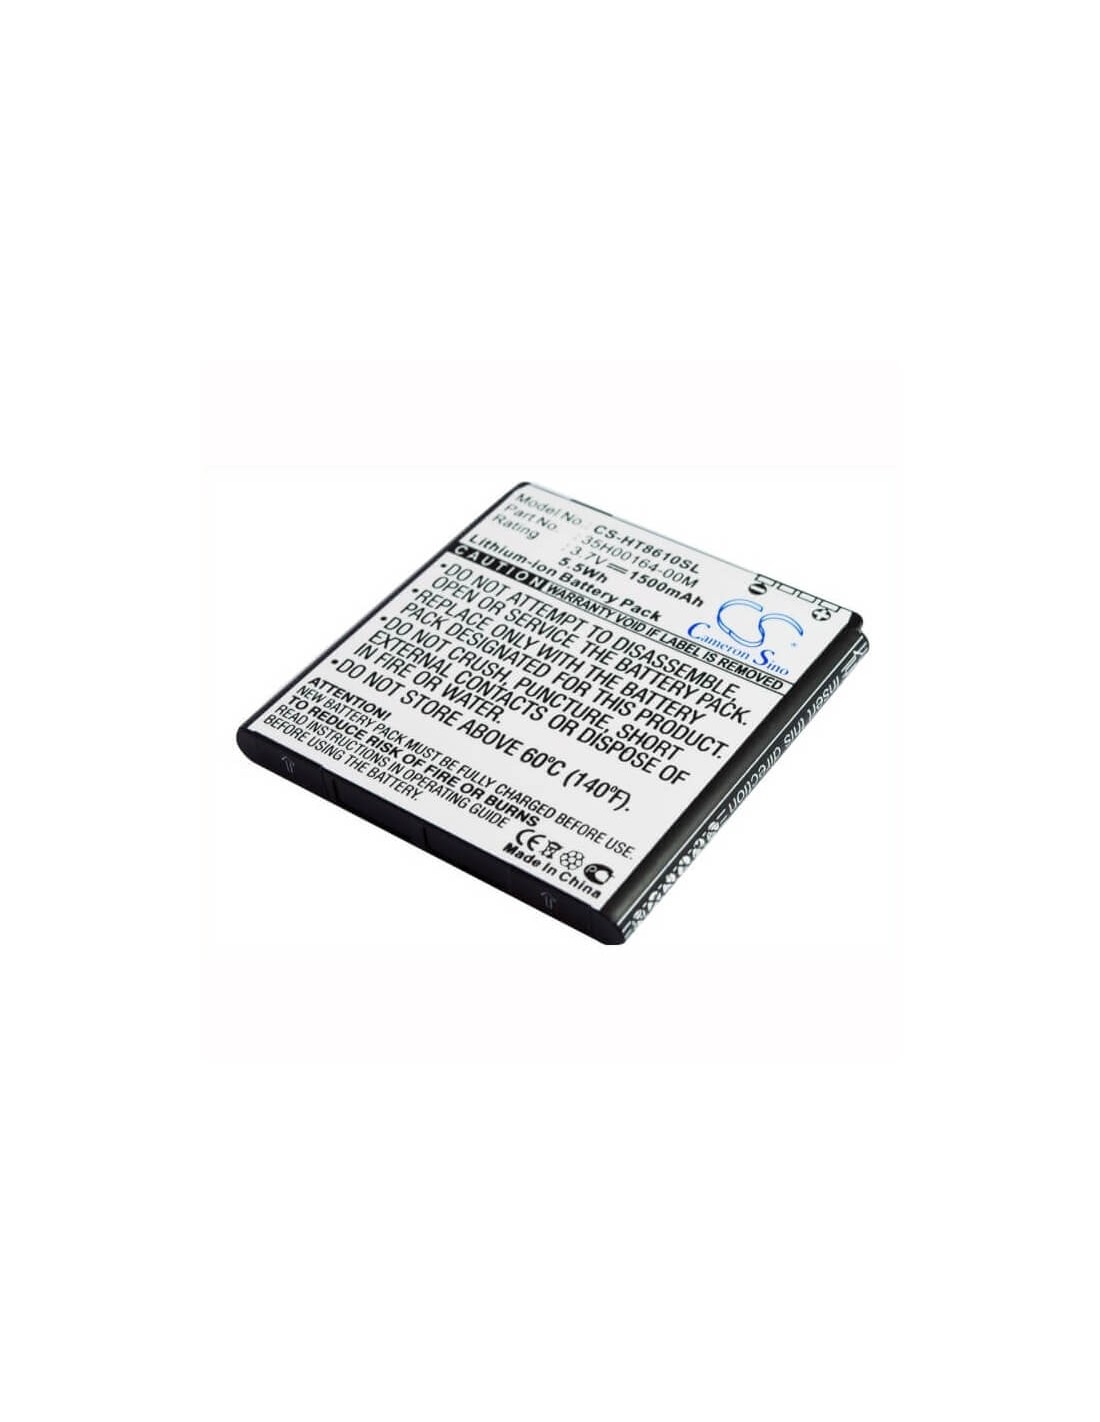 Battery for HTC EVO 3D, Pyramid, Shooter 3.7V, 1500mAh - 5.55Wh